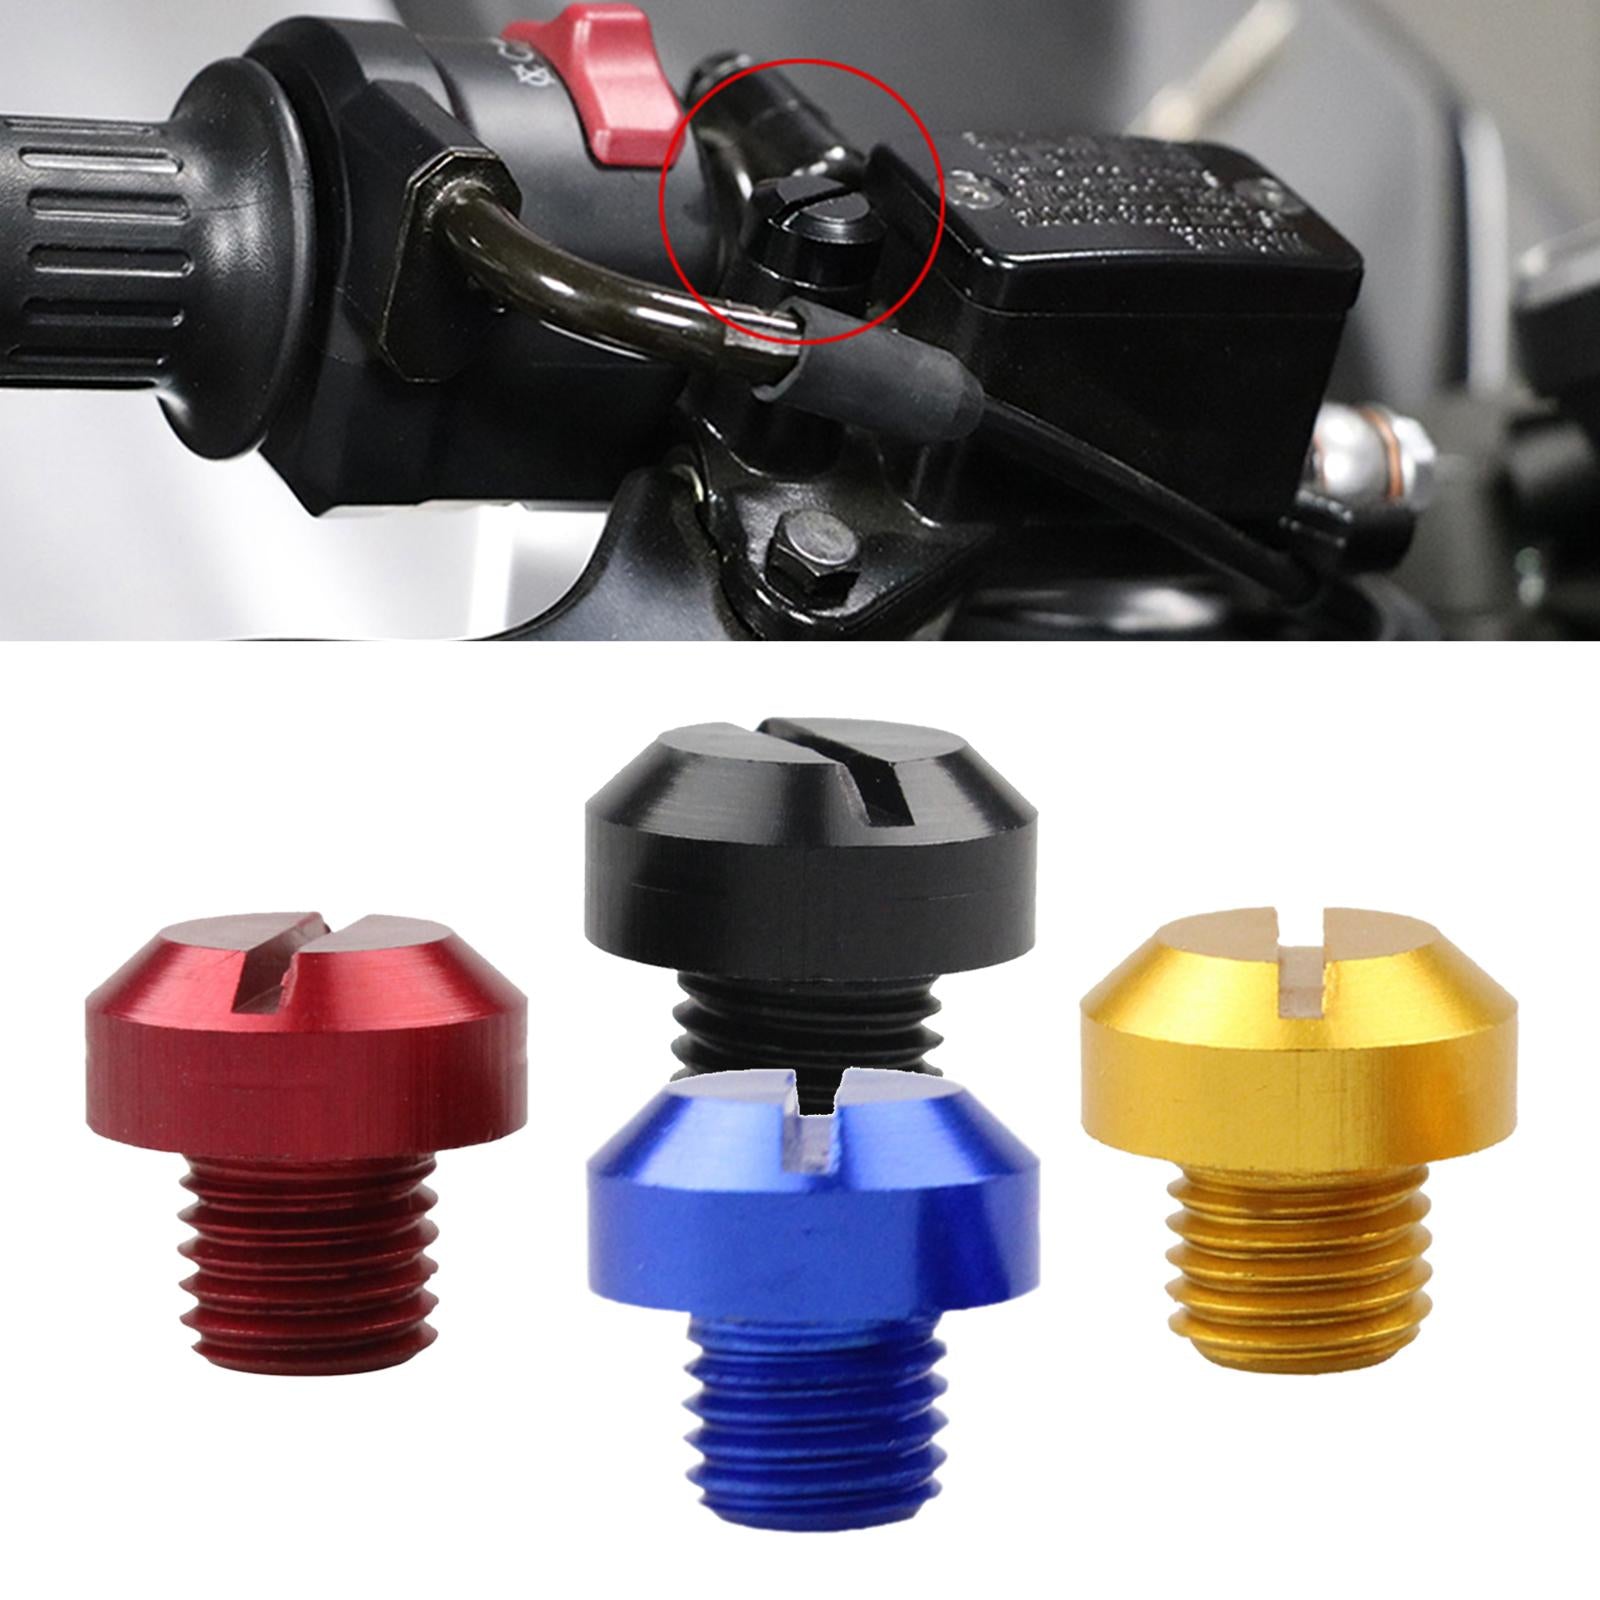 2 Pcs M10x1.25 Rearview Mirrors Thread Hole Plug Screw Bolts Red Positive